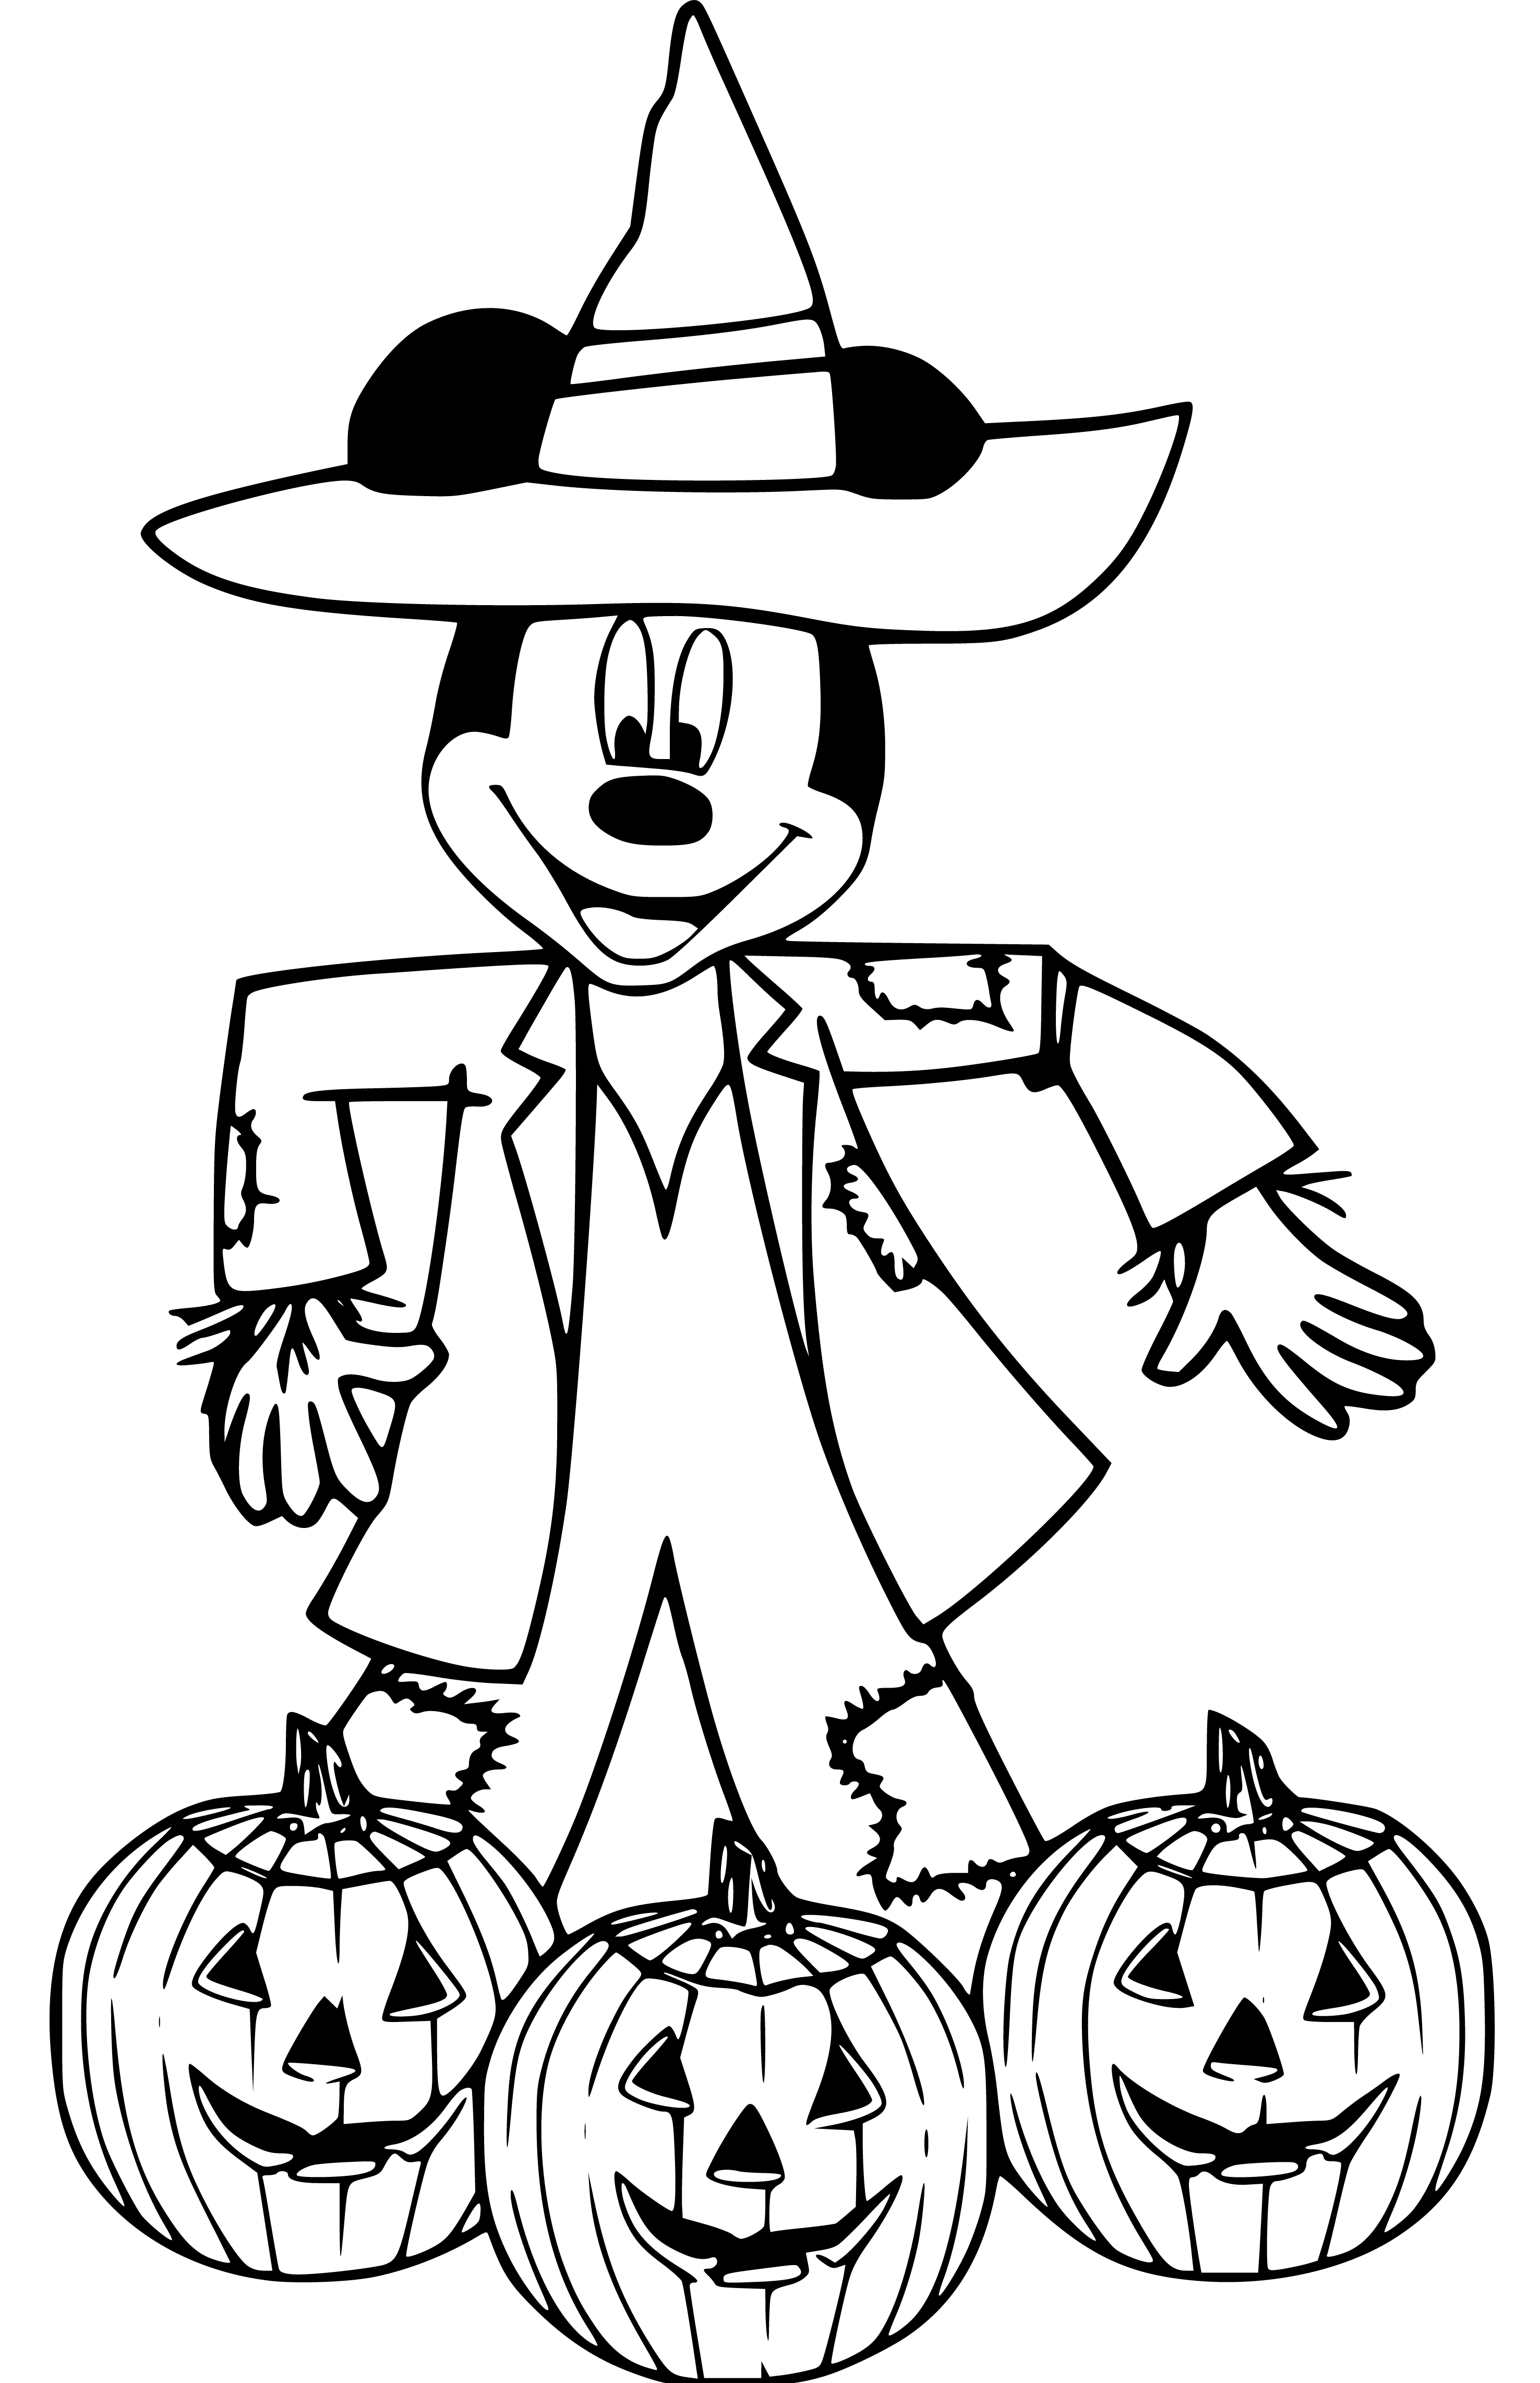 Printable Mickey and Pumpkins of Halloween Coloring Page for kids.